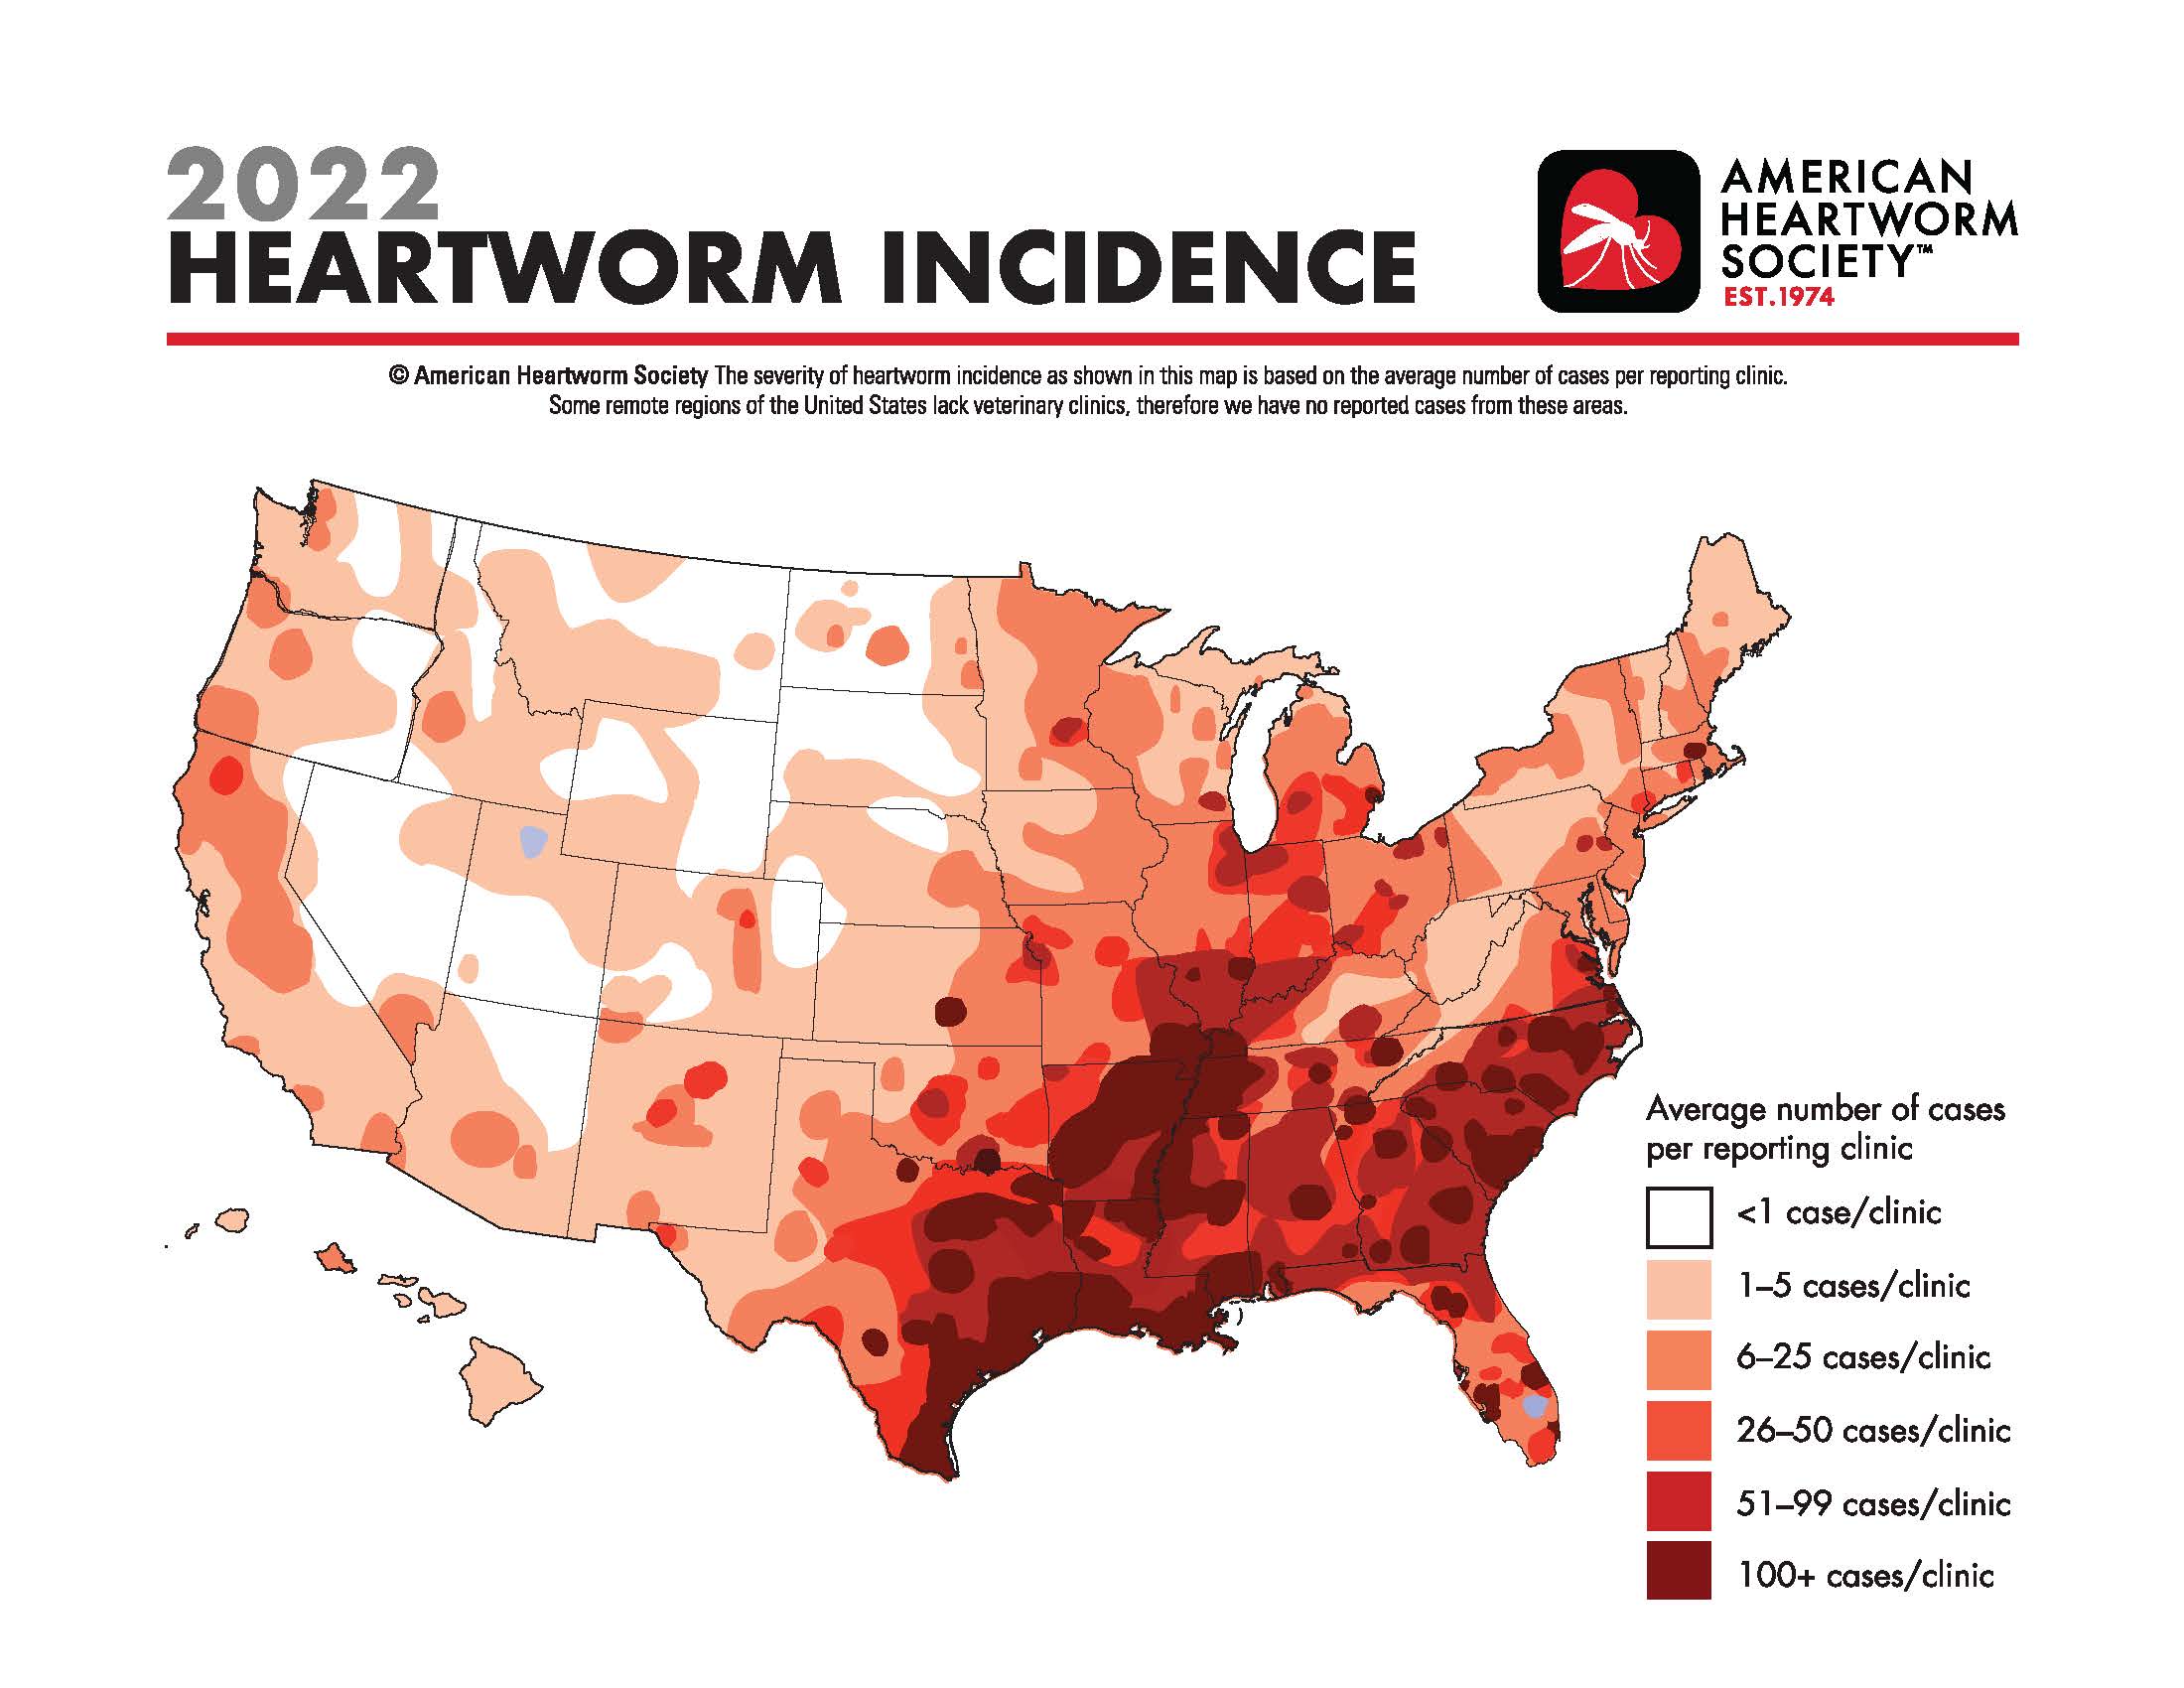 New American Heartworm Society Heartworm Incidence Map  Reveals Upward Trend in Heartworm Cases